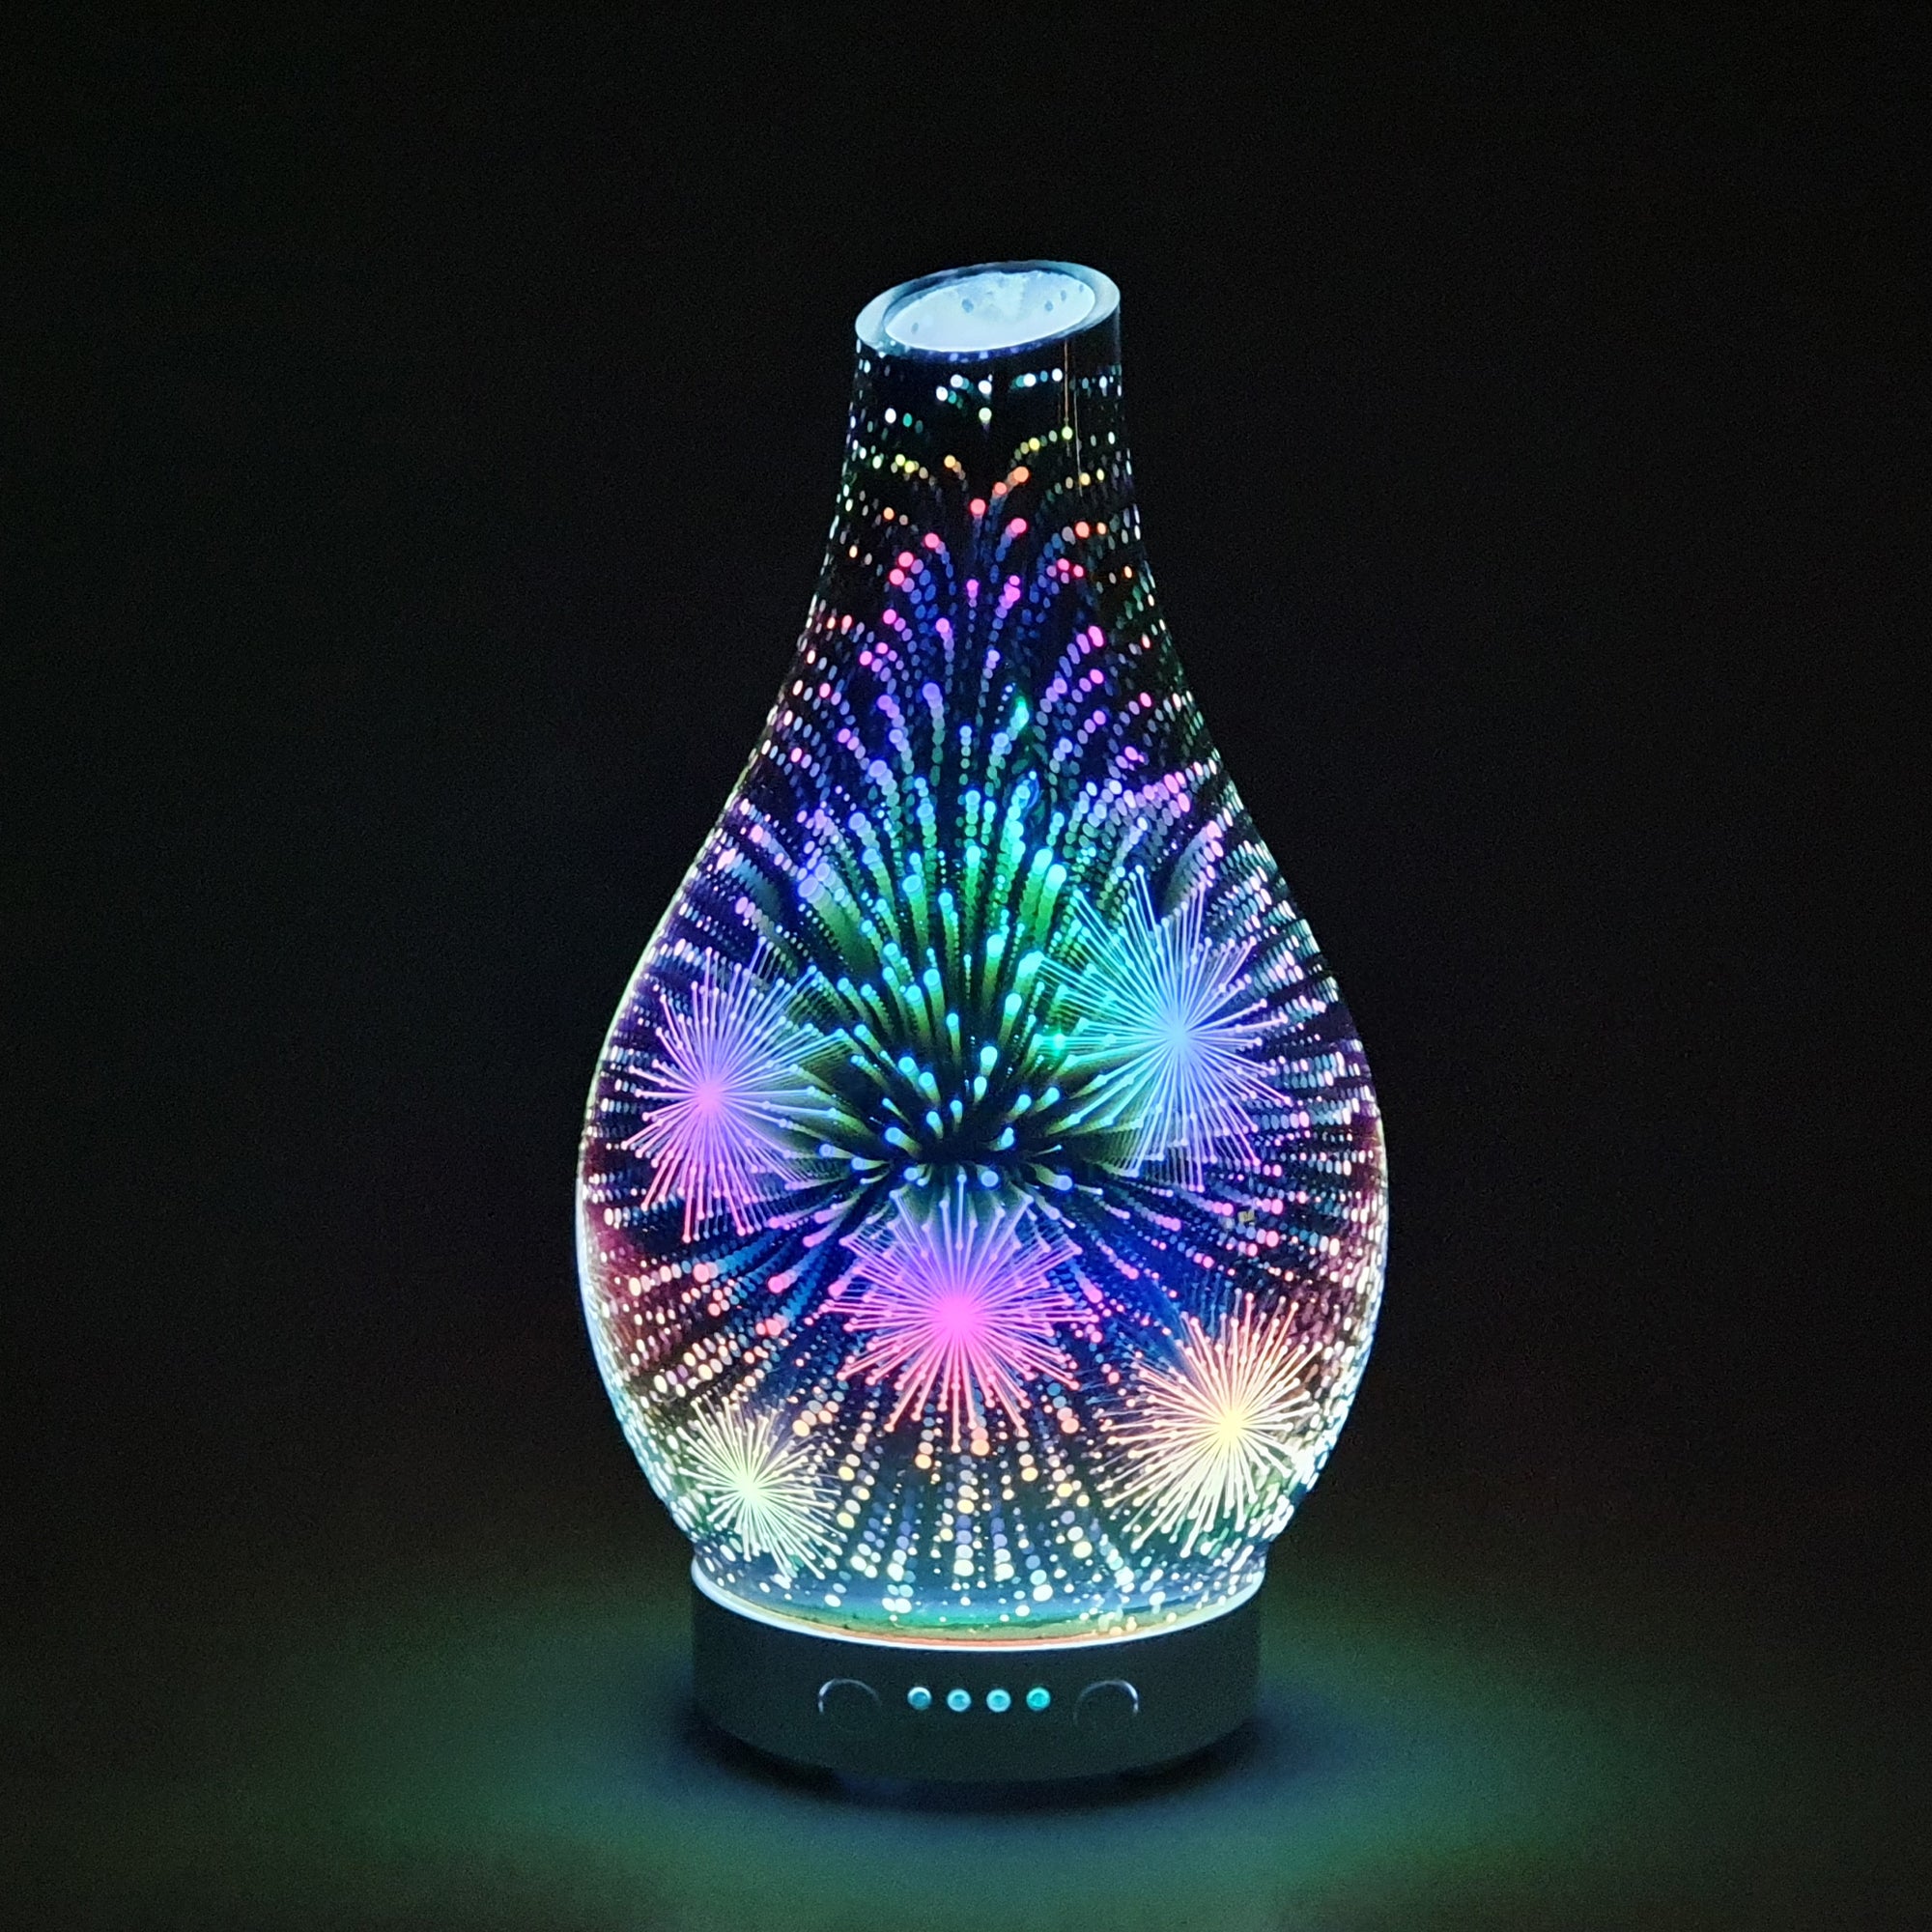 This Oil Diffuser is perfect not only for fireworks night, but for every occasion and celebration, because who doesn'tt love some fireworks all year round.